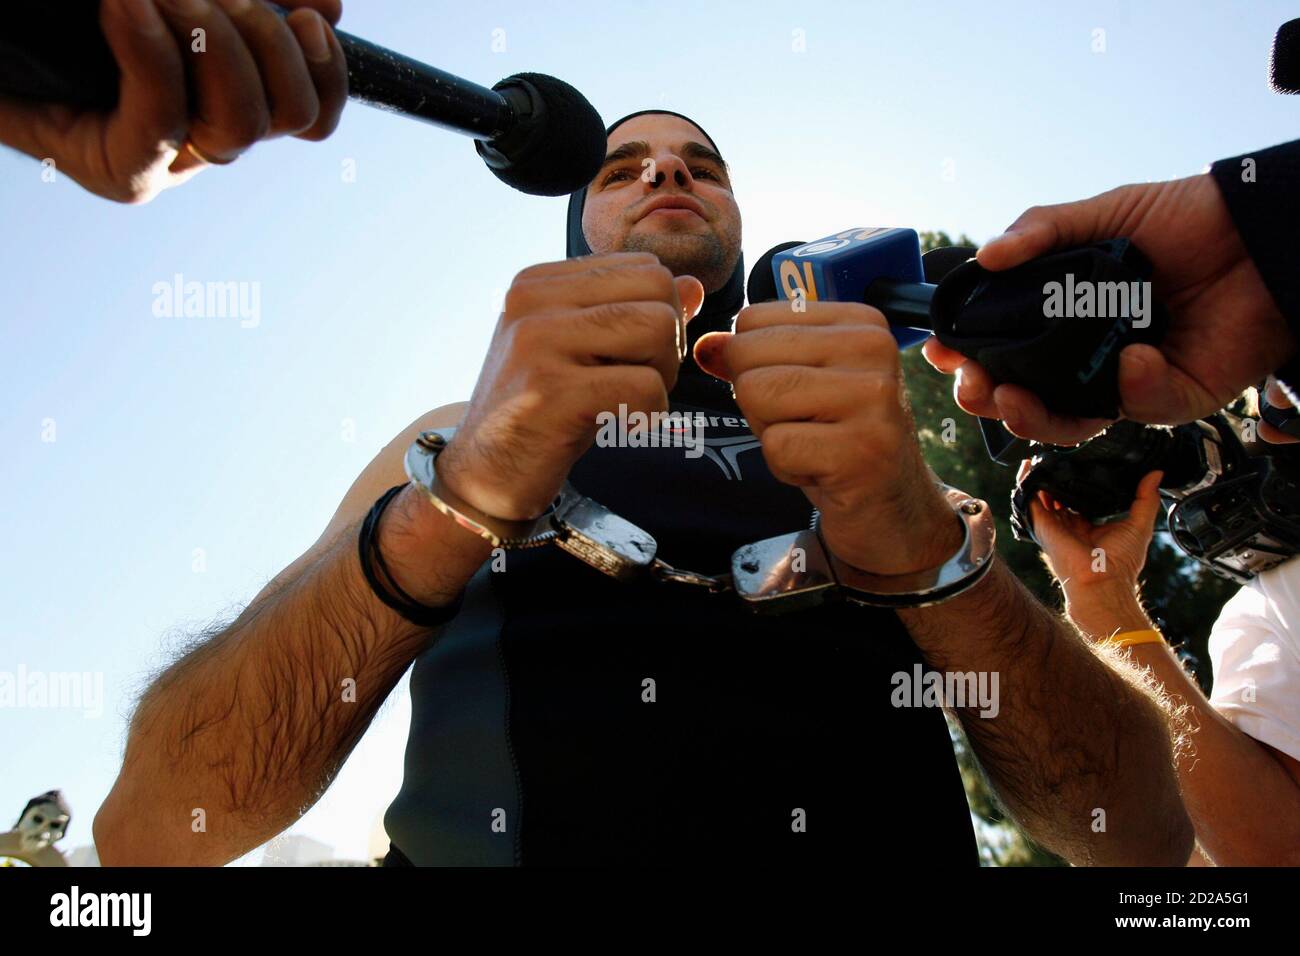 Hungarian escape artist David Merlini answers questions from reporters  after failing to break the world record for the longest time under water  without air at the Magic Castle in Hollywood, California October